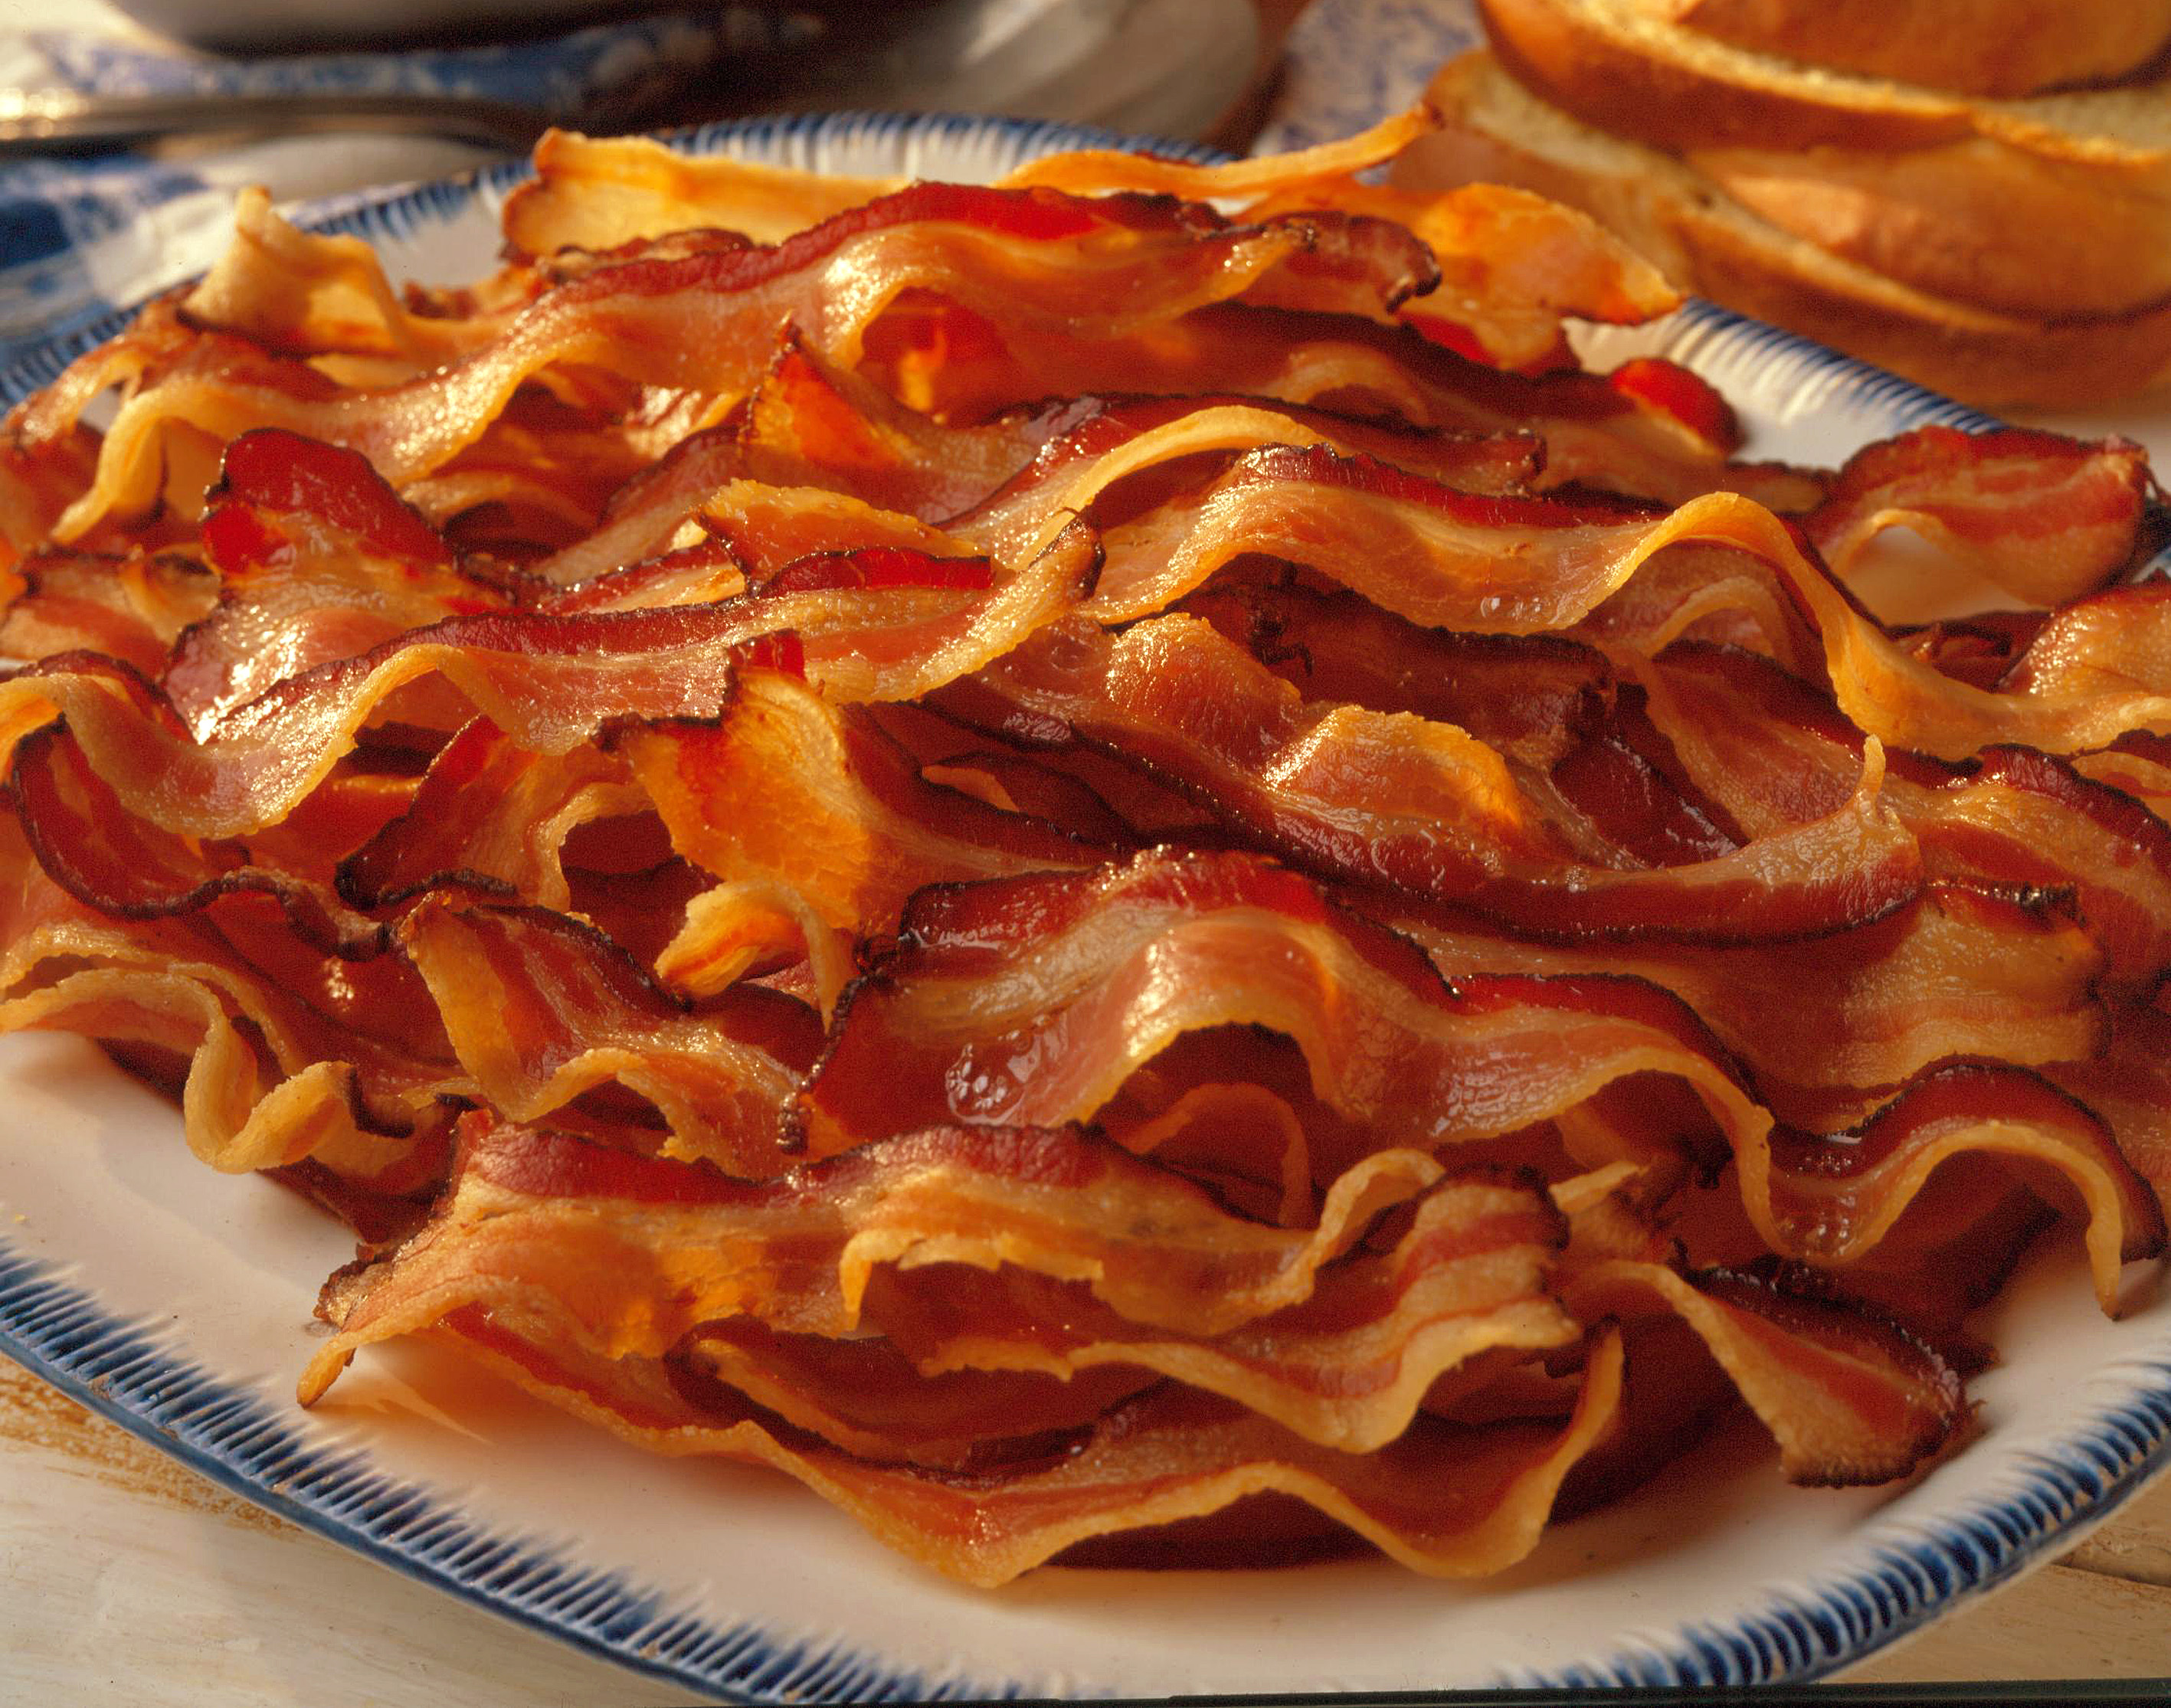 HQ Bacon Wallpapers | File 1696.34Kb